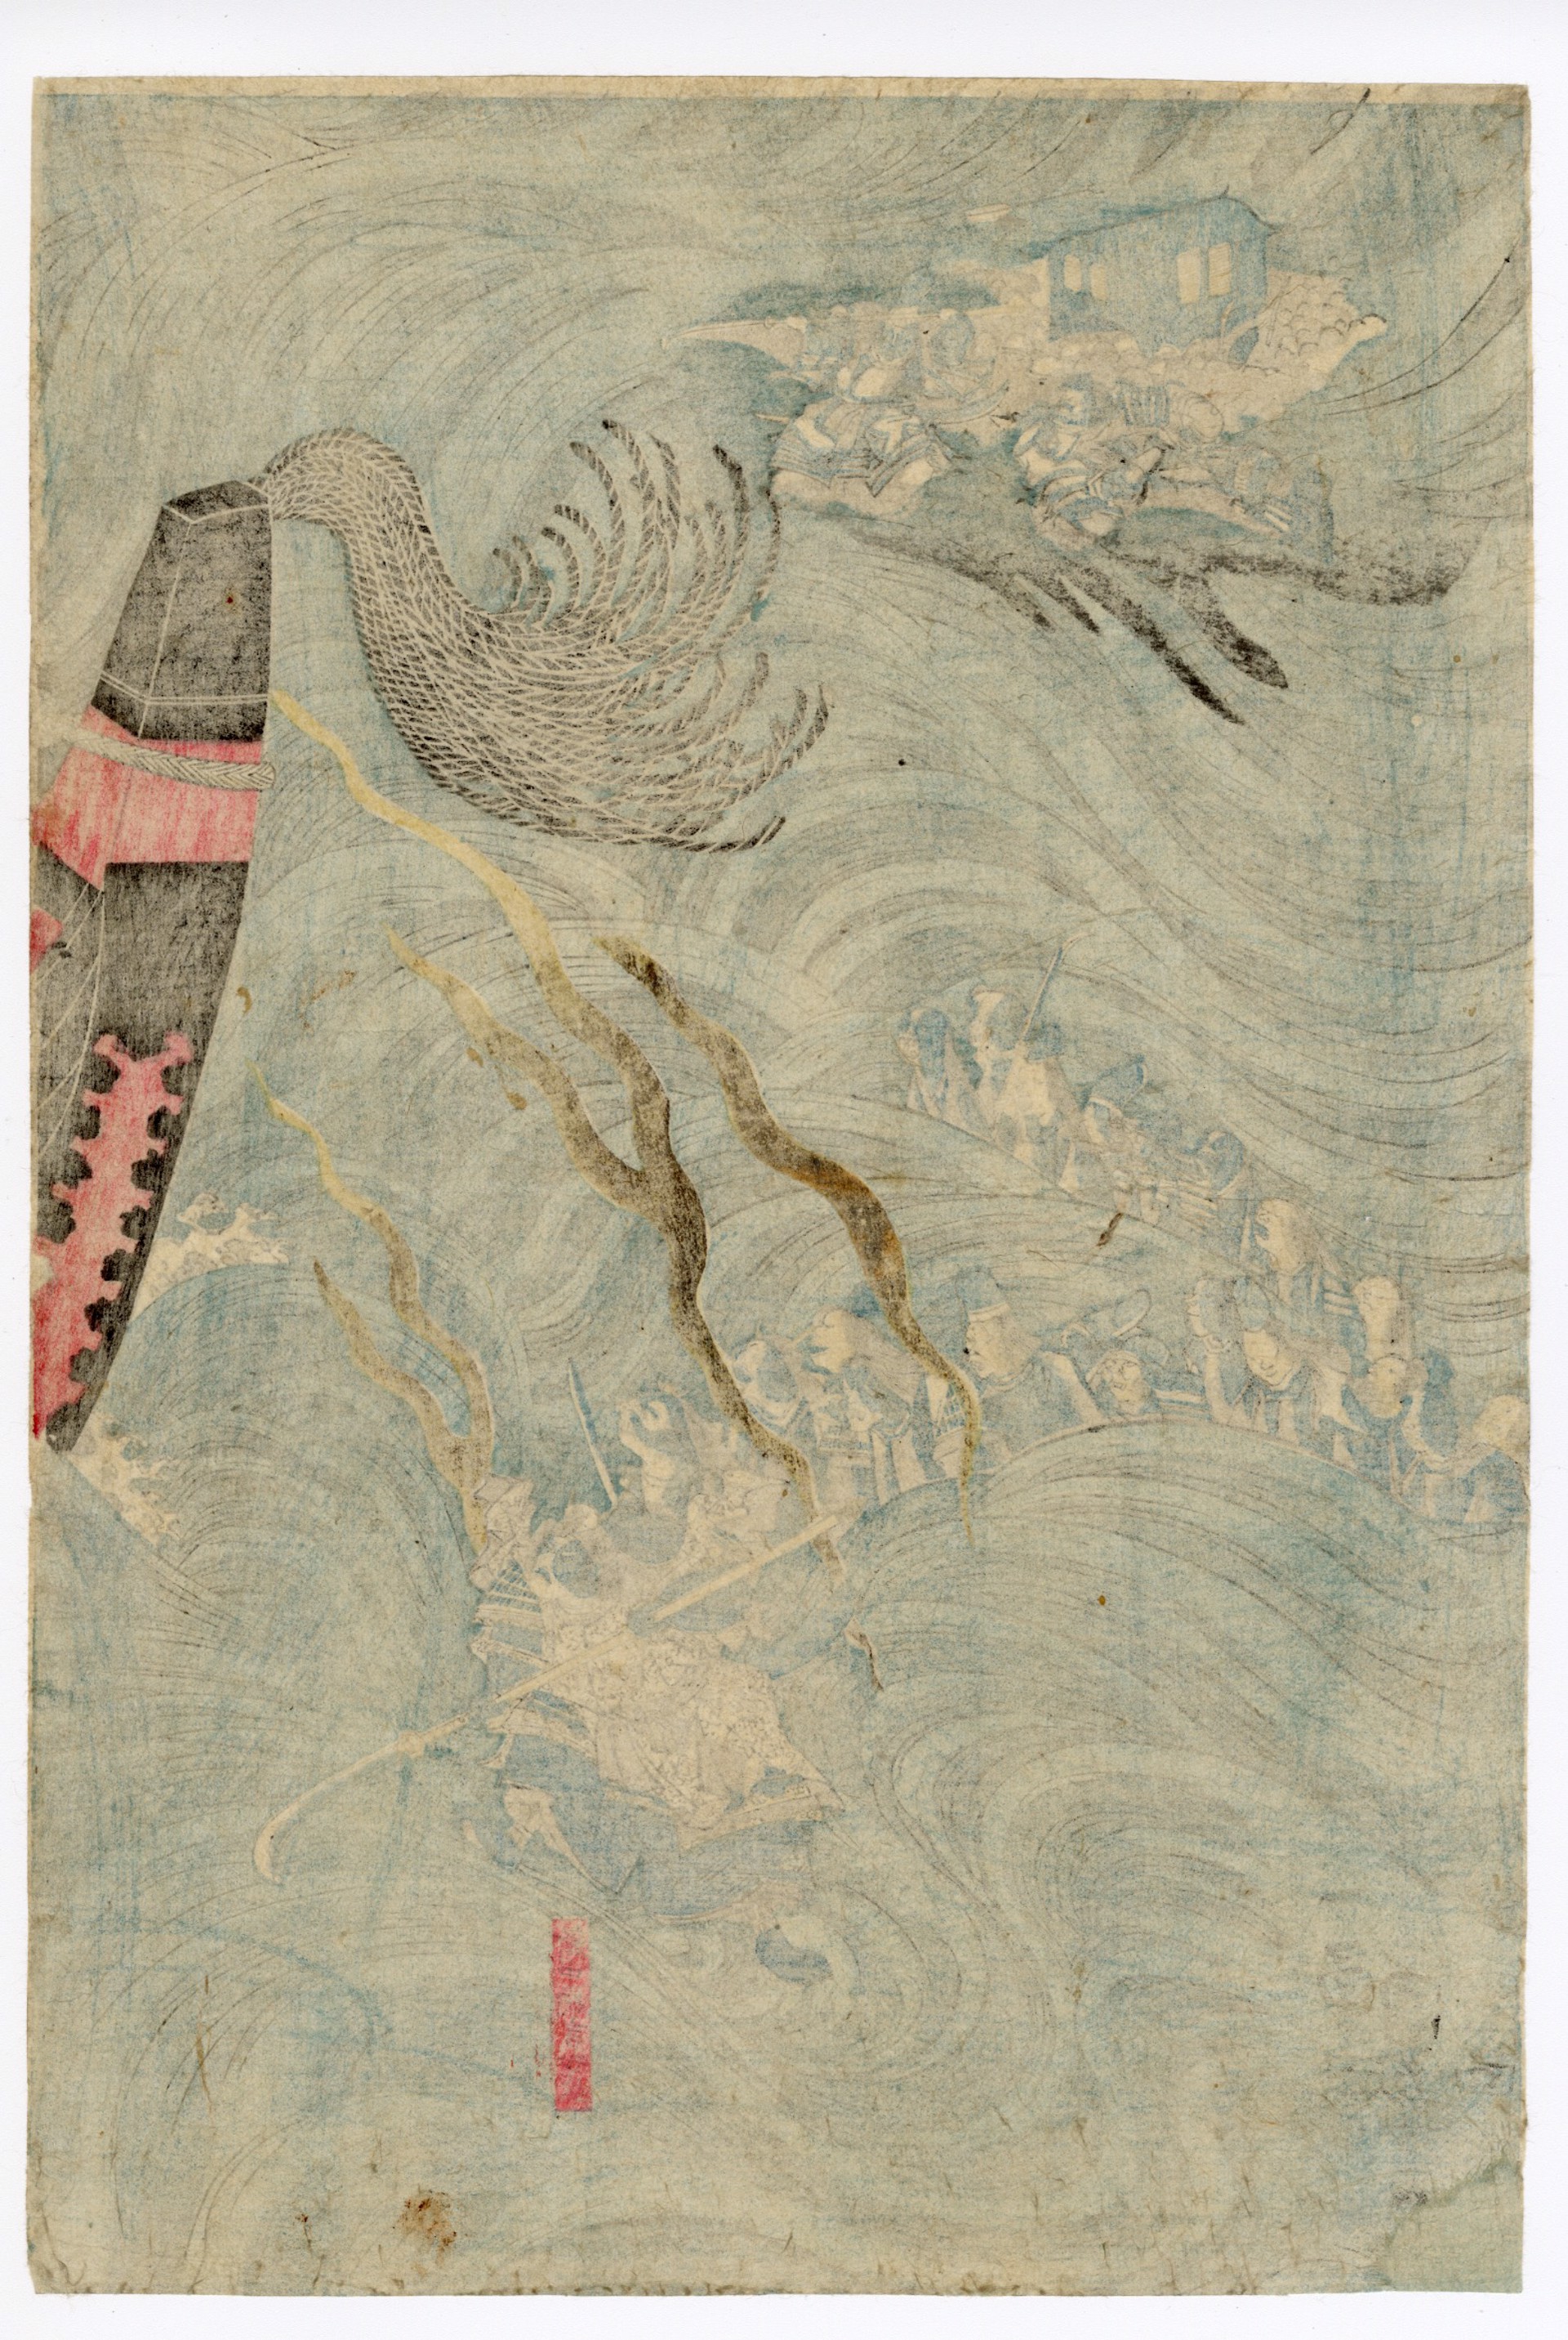 The Ghosts of the Heike Appear at Daimotsu Bay in Settsu by Kuniyoshi